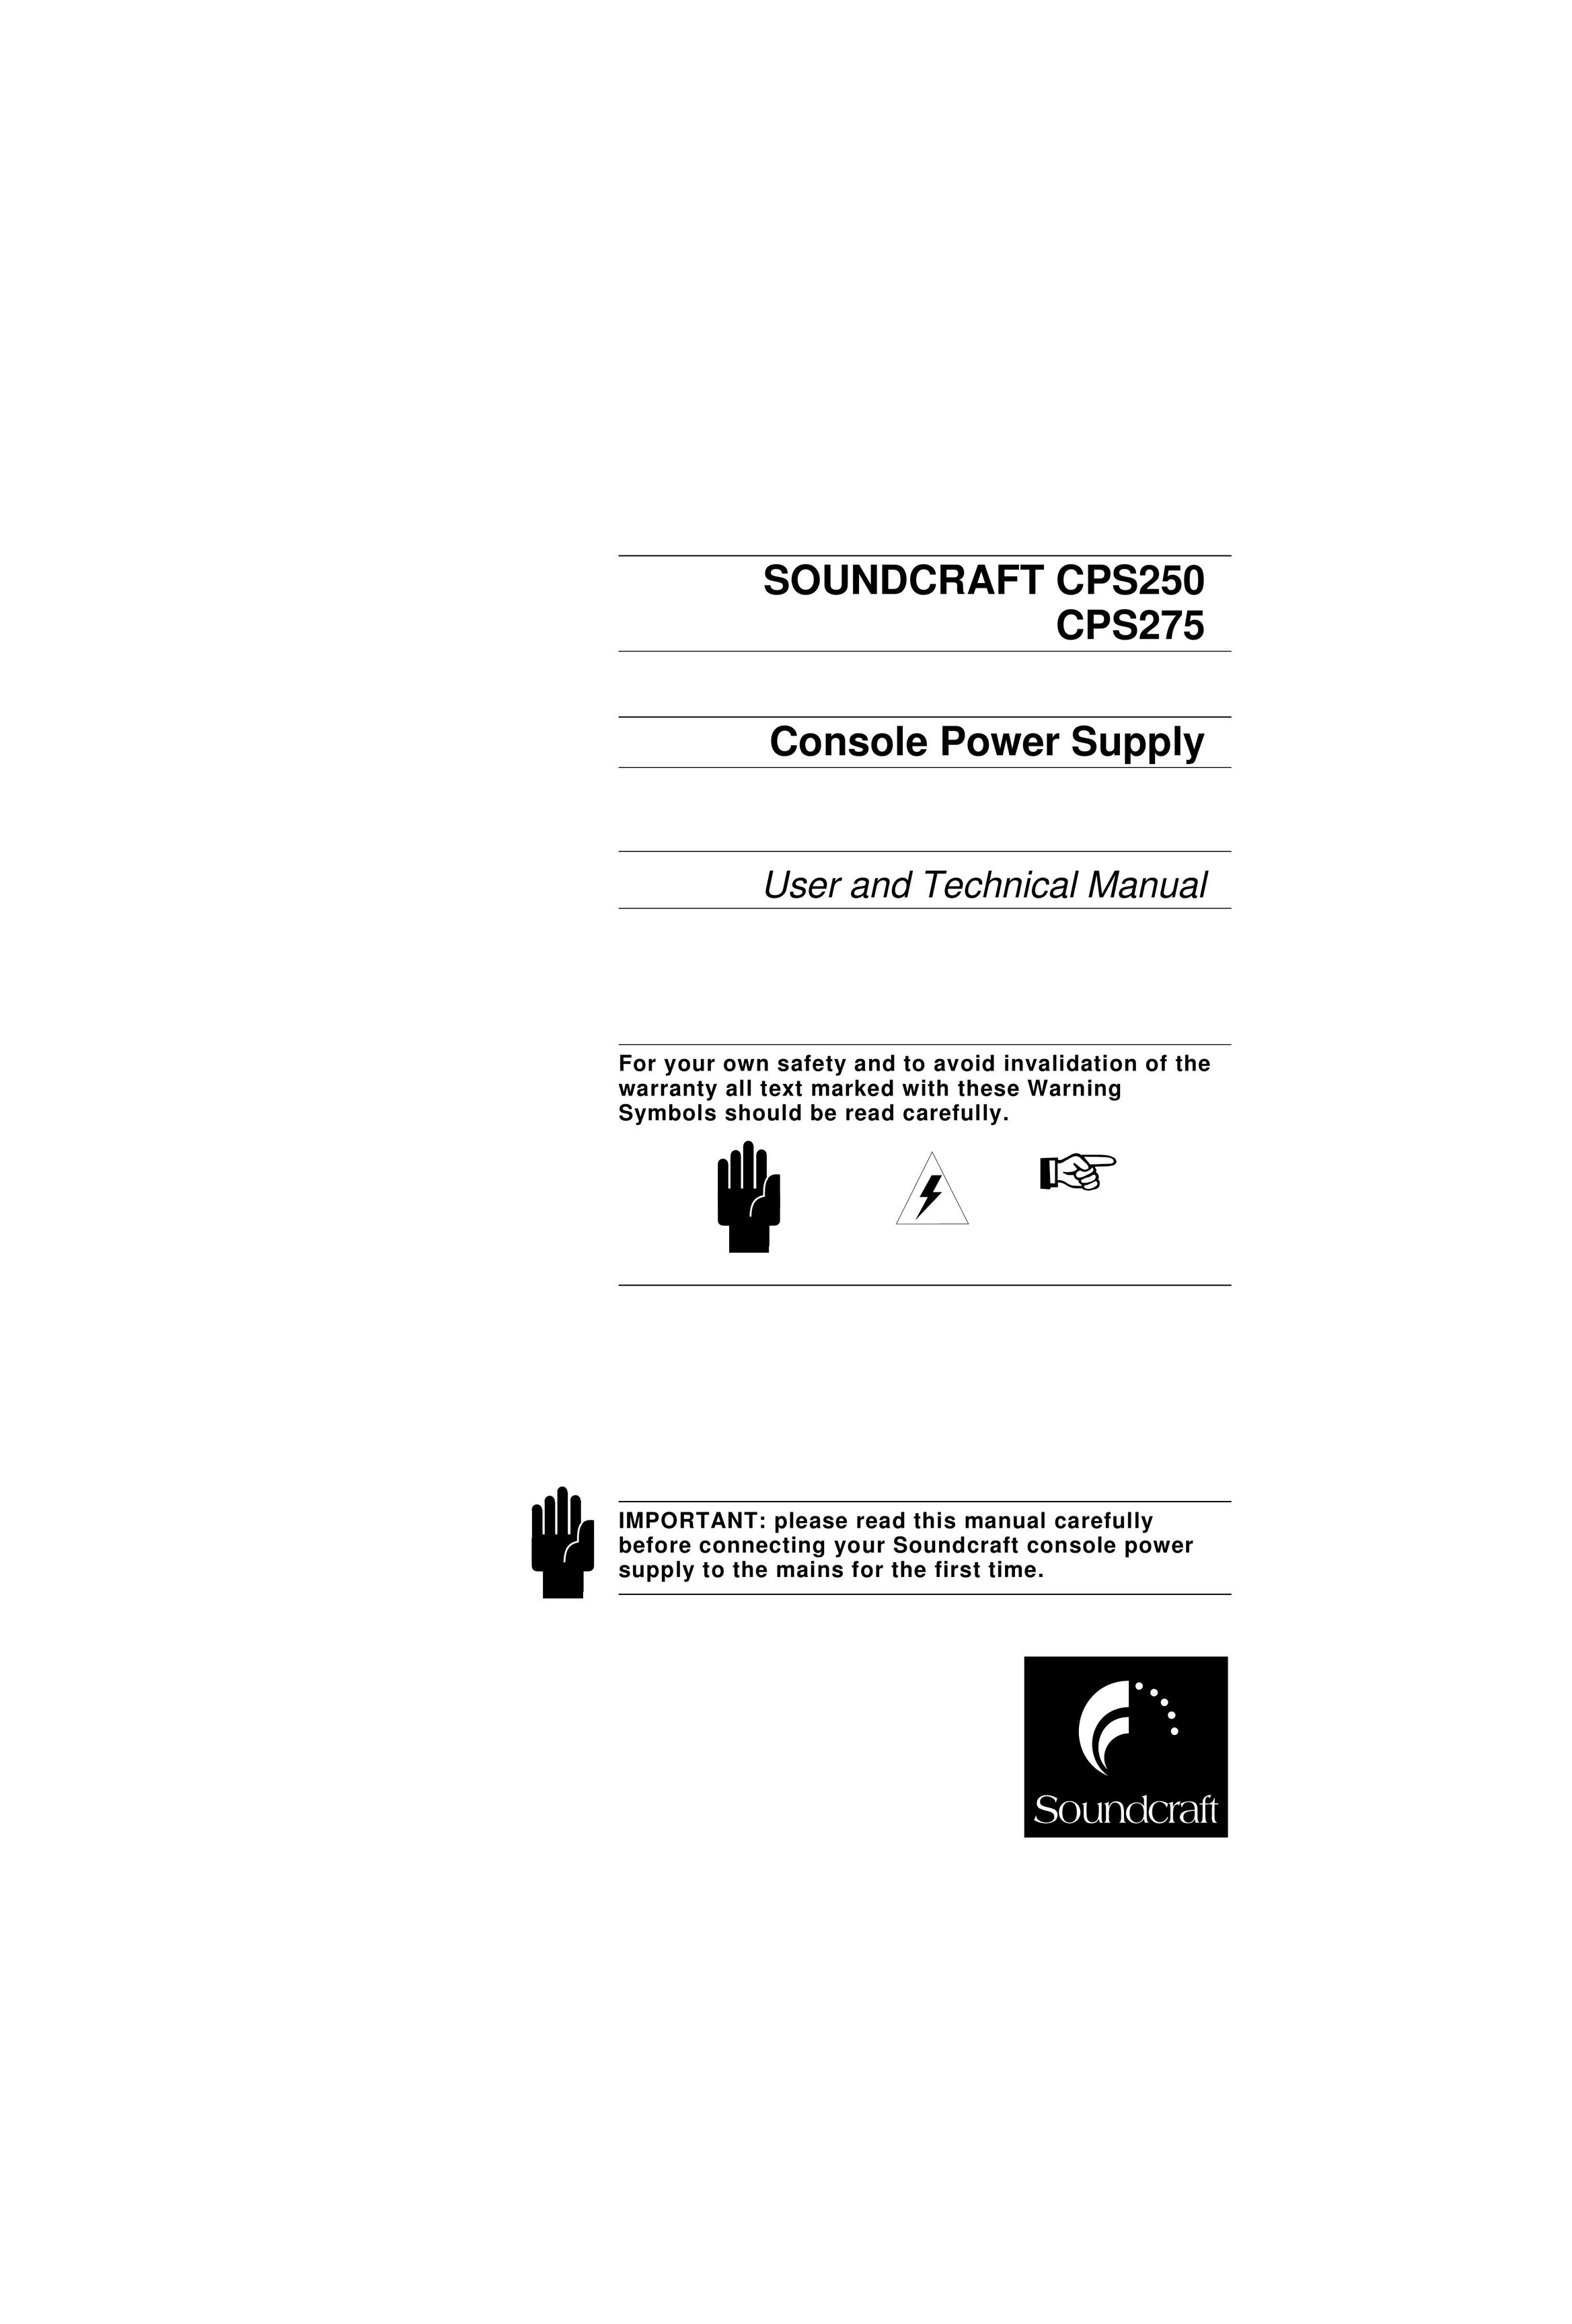 SoundCraft CPS275 Power Supply User Manual